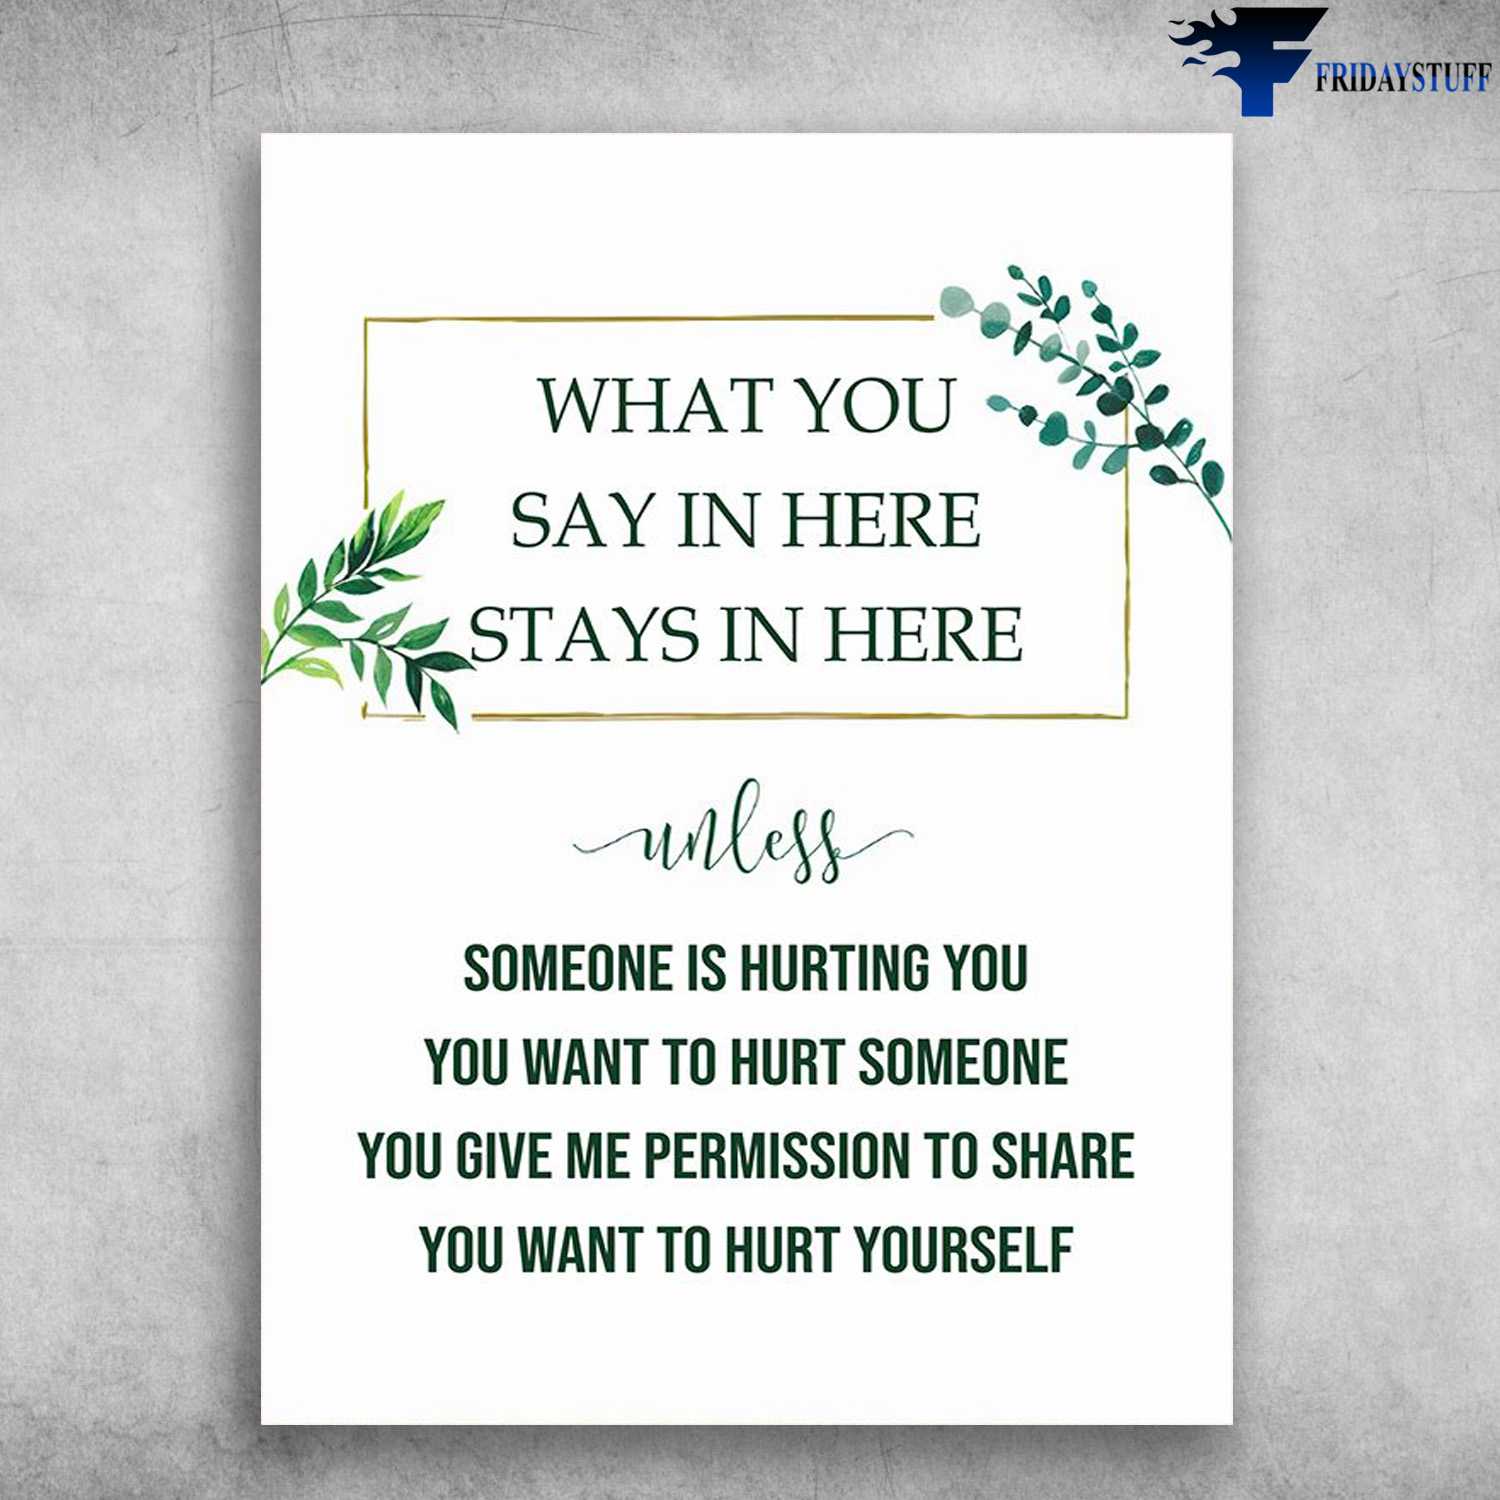 Wall Poster - What You Say In Here, Stays In Here, Unless Someone Is Hurting You, You Want To Hurt Someone, You Give Me Permission To Share, You Want To Hurt Yourself